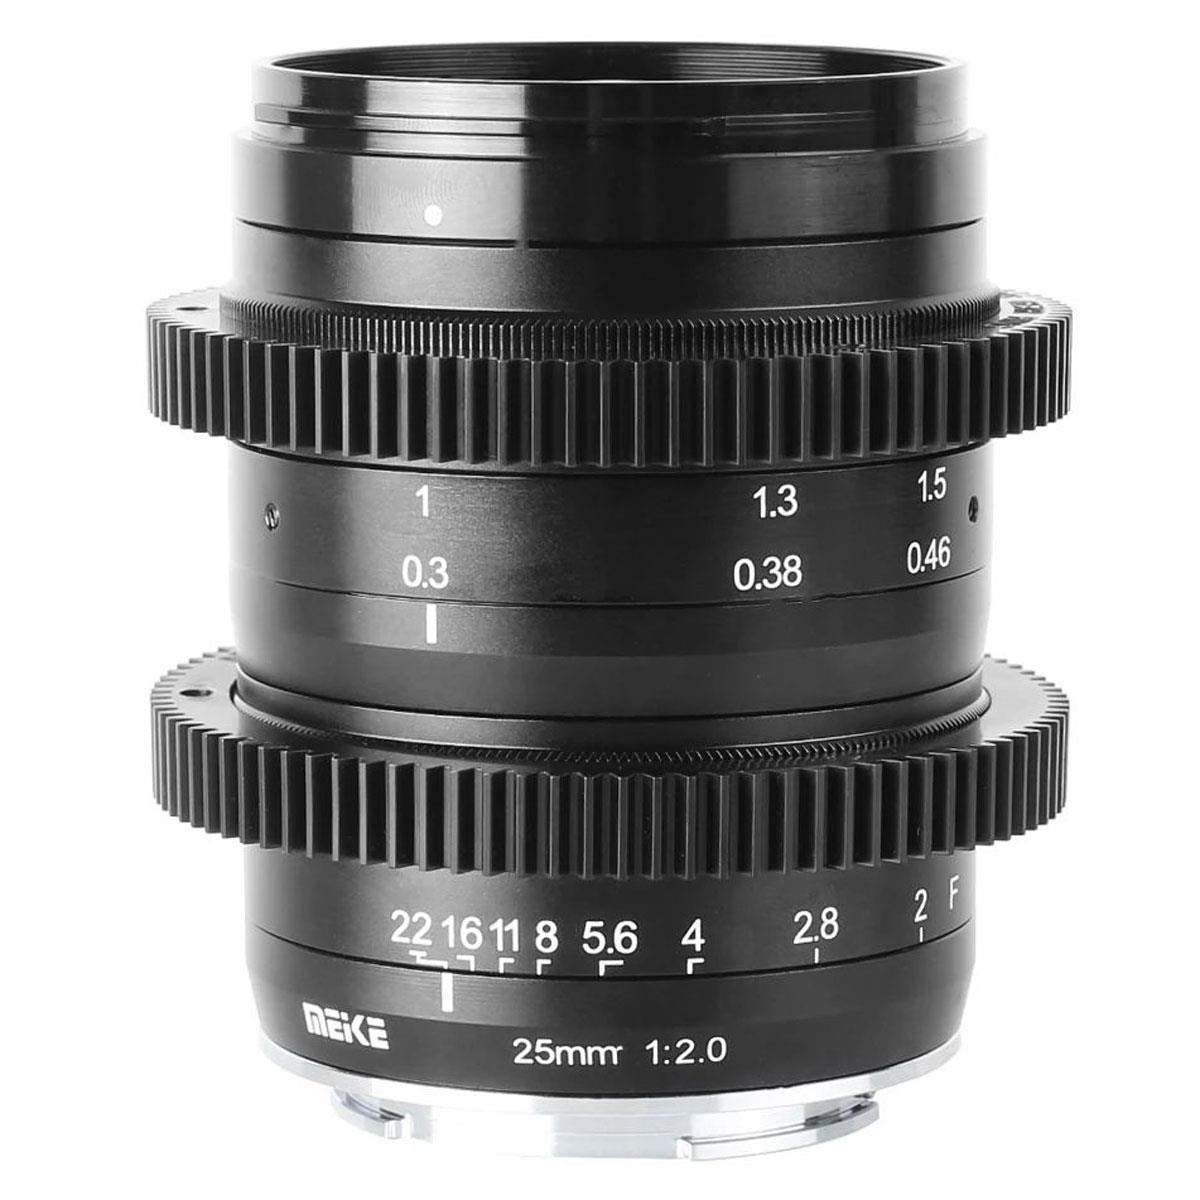 Image of Meike 25mm f/2.0 Lens for Micro Four Thirds